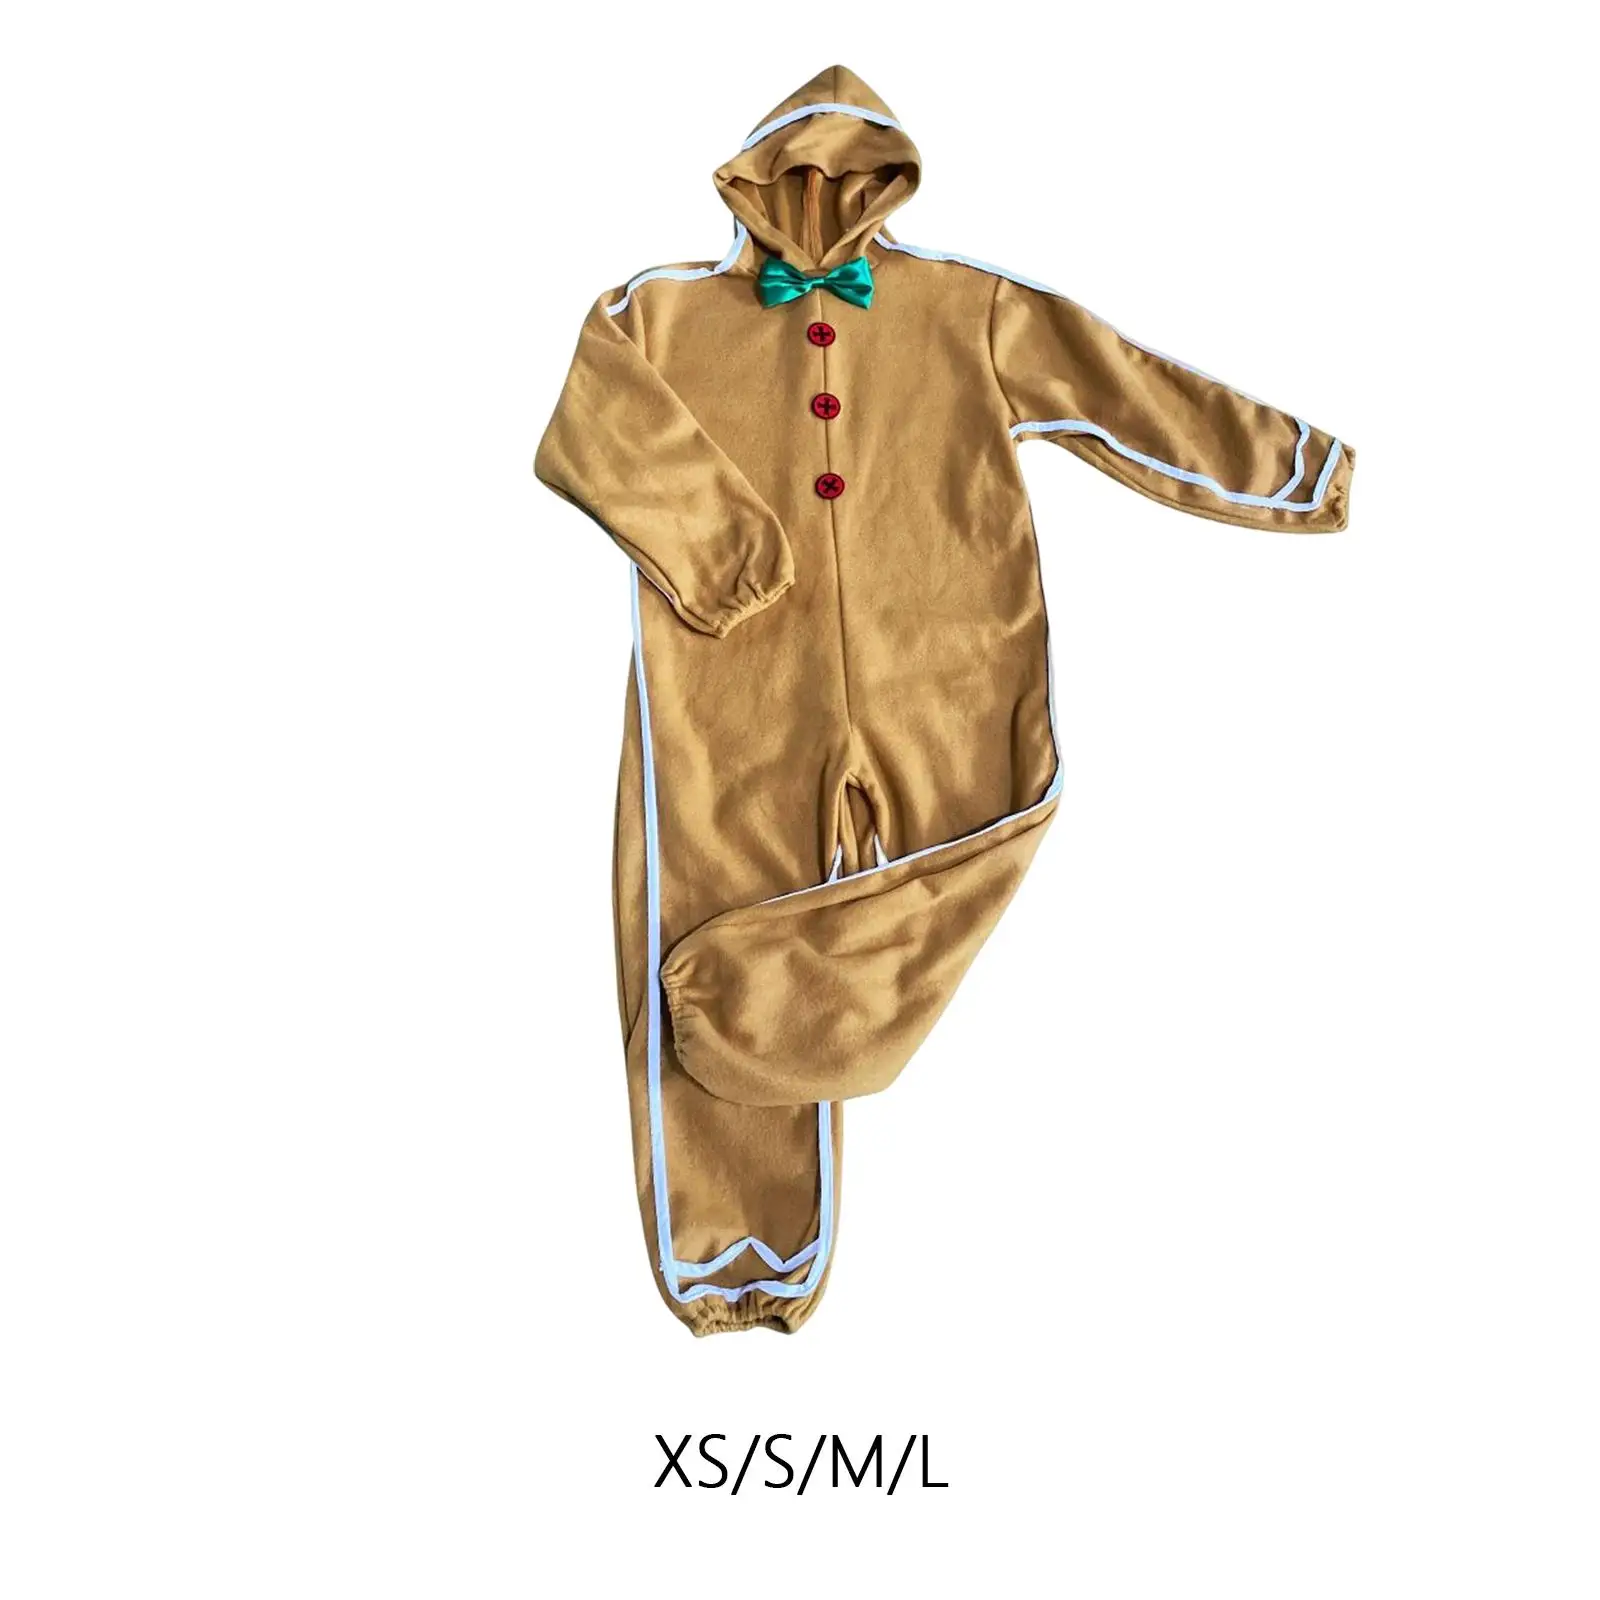 Christmas Outfit Photo Prop Children Dress up Gingerbread Costume Apparel for Festival Xmas Holiday Masquerade Halloween